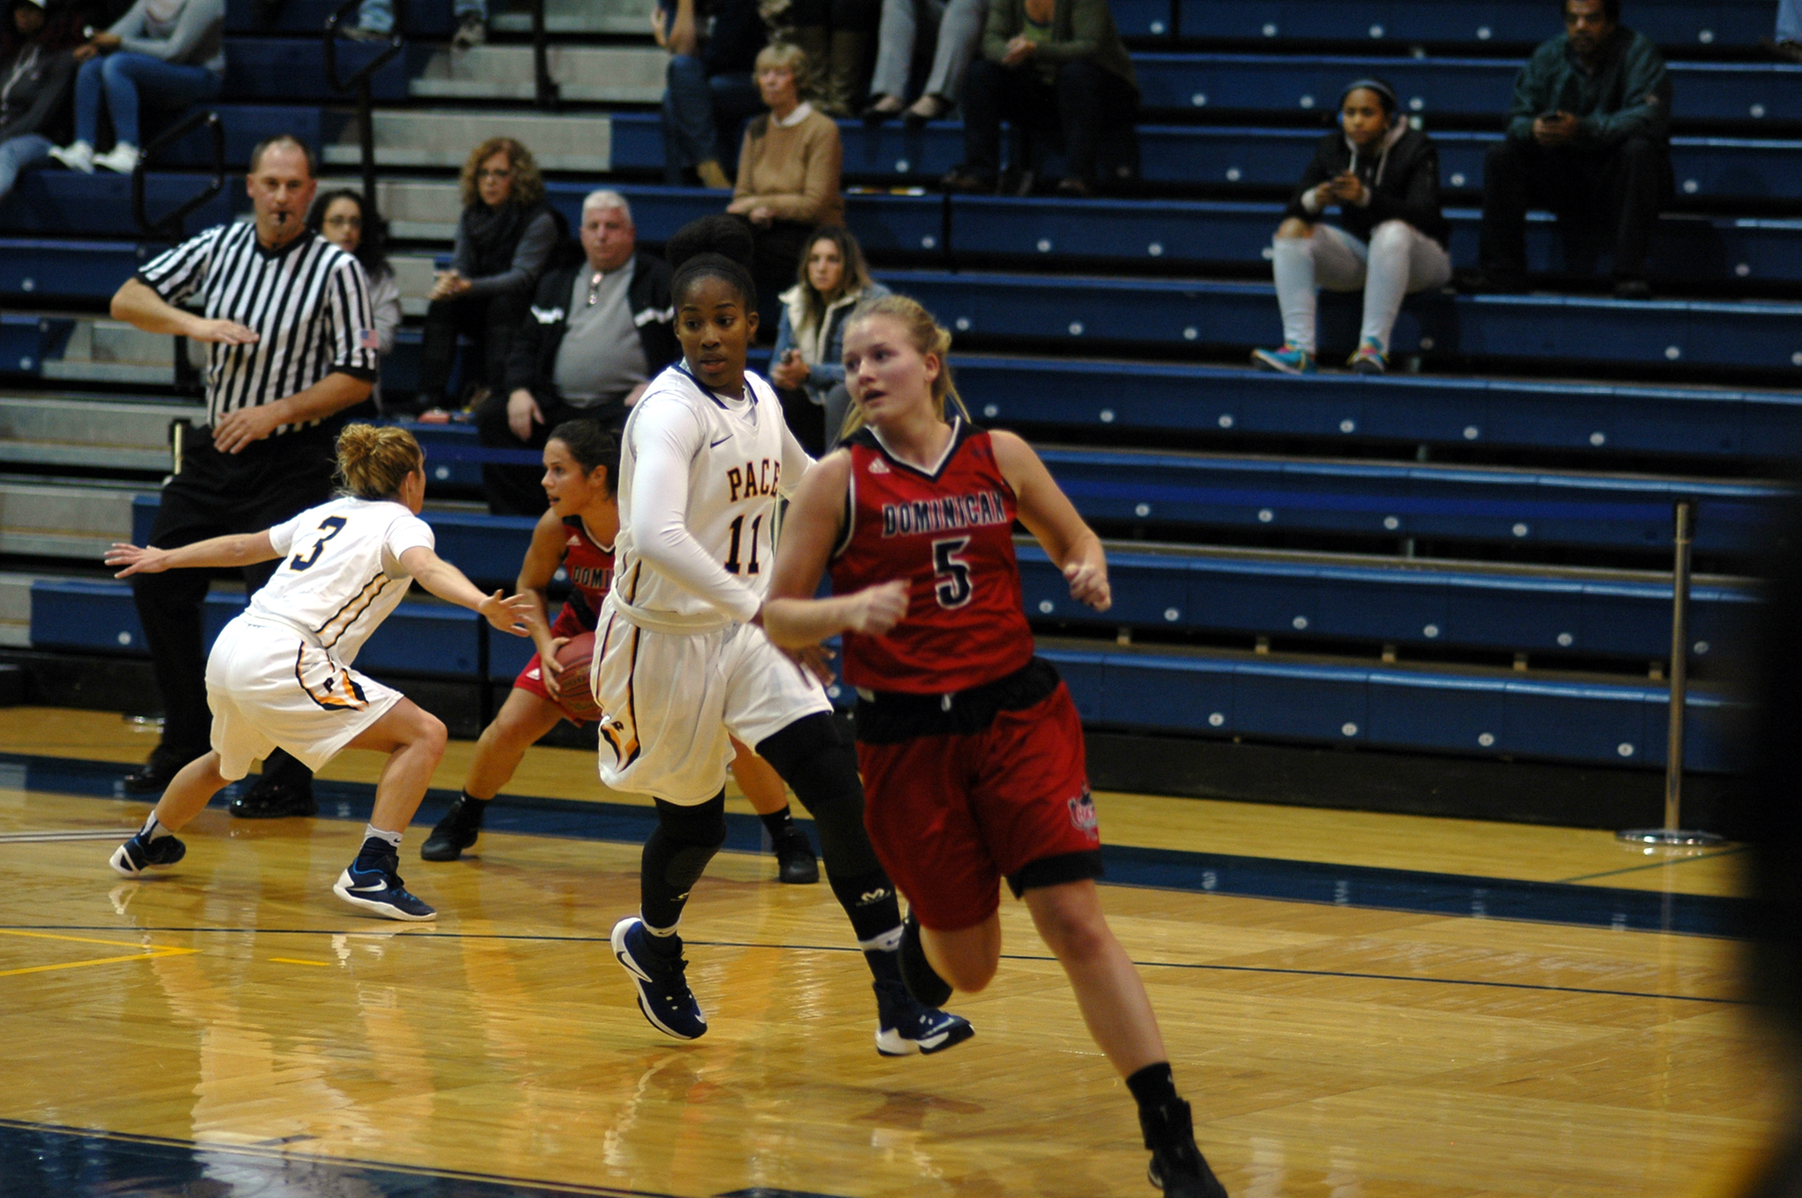 Senior guard Jacqueline Rywalt who grabbed four rebounds and two assists in the loss to SCSU.